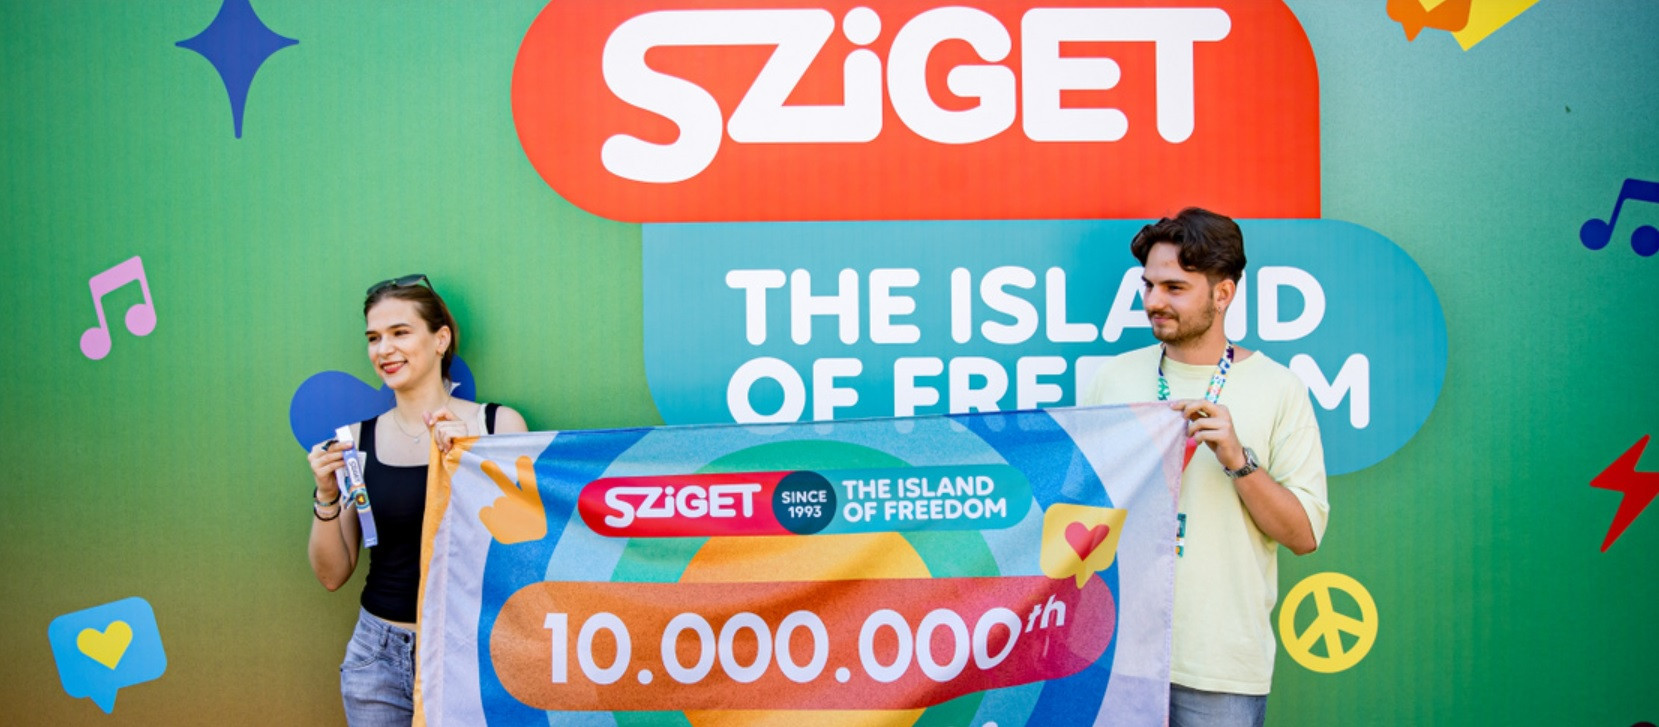 Watch: Lucky Veronika Mikes Just Got a Lifetime Pass to Sziget Festival in Budapest